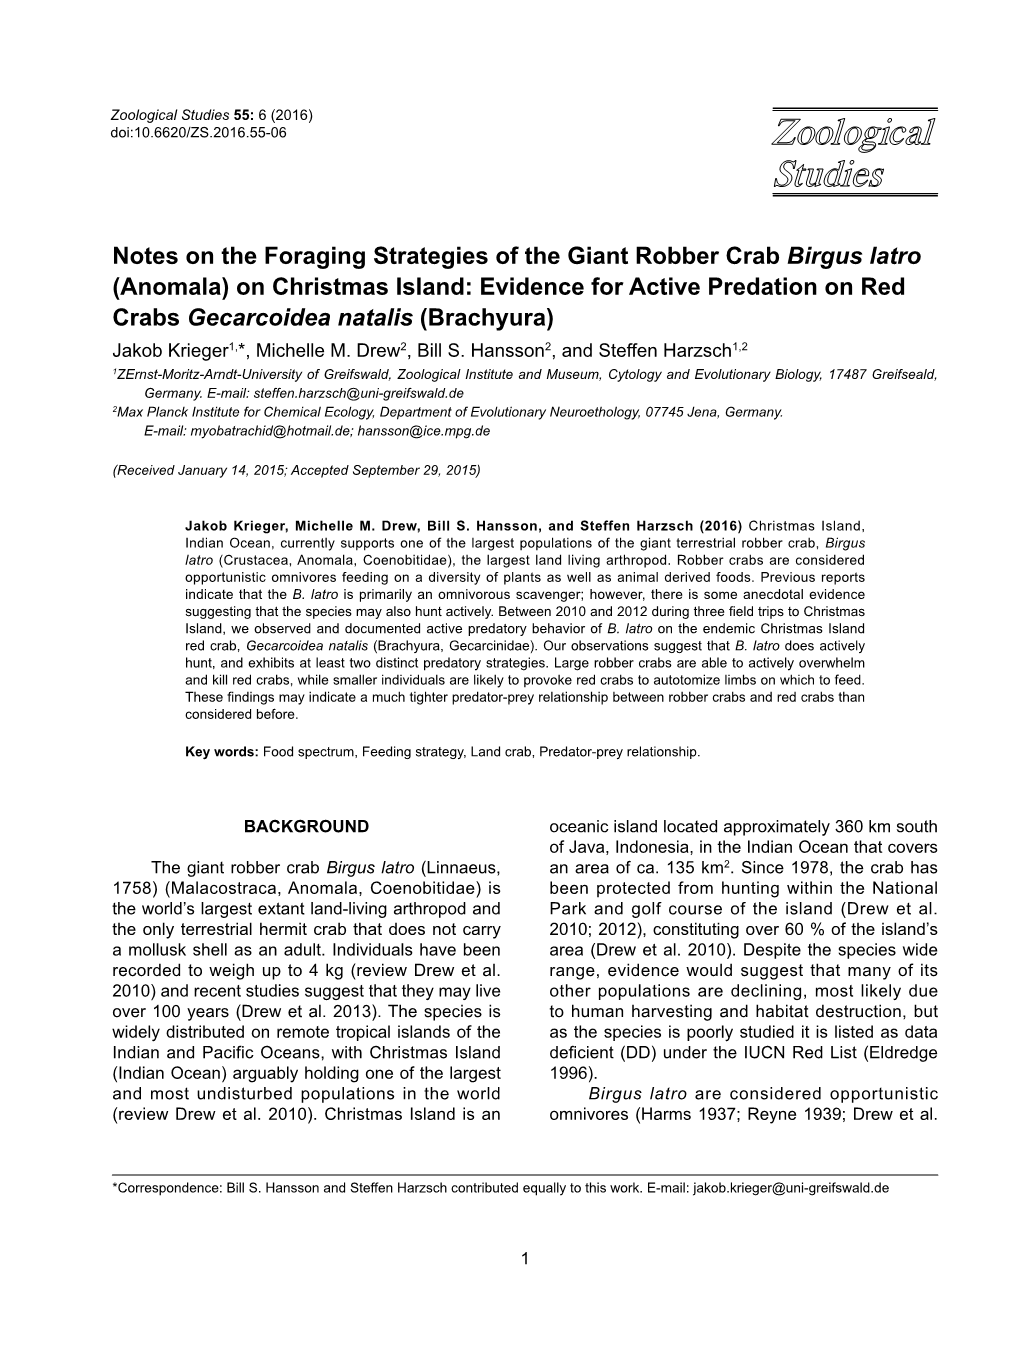 Notes on the Foraging Strategies of the Giant Robber Crab Birgus Latro